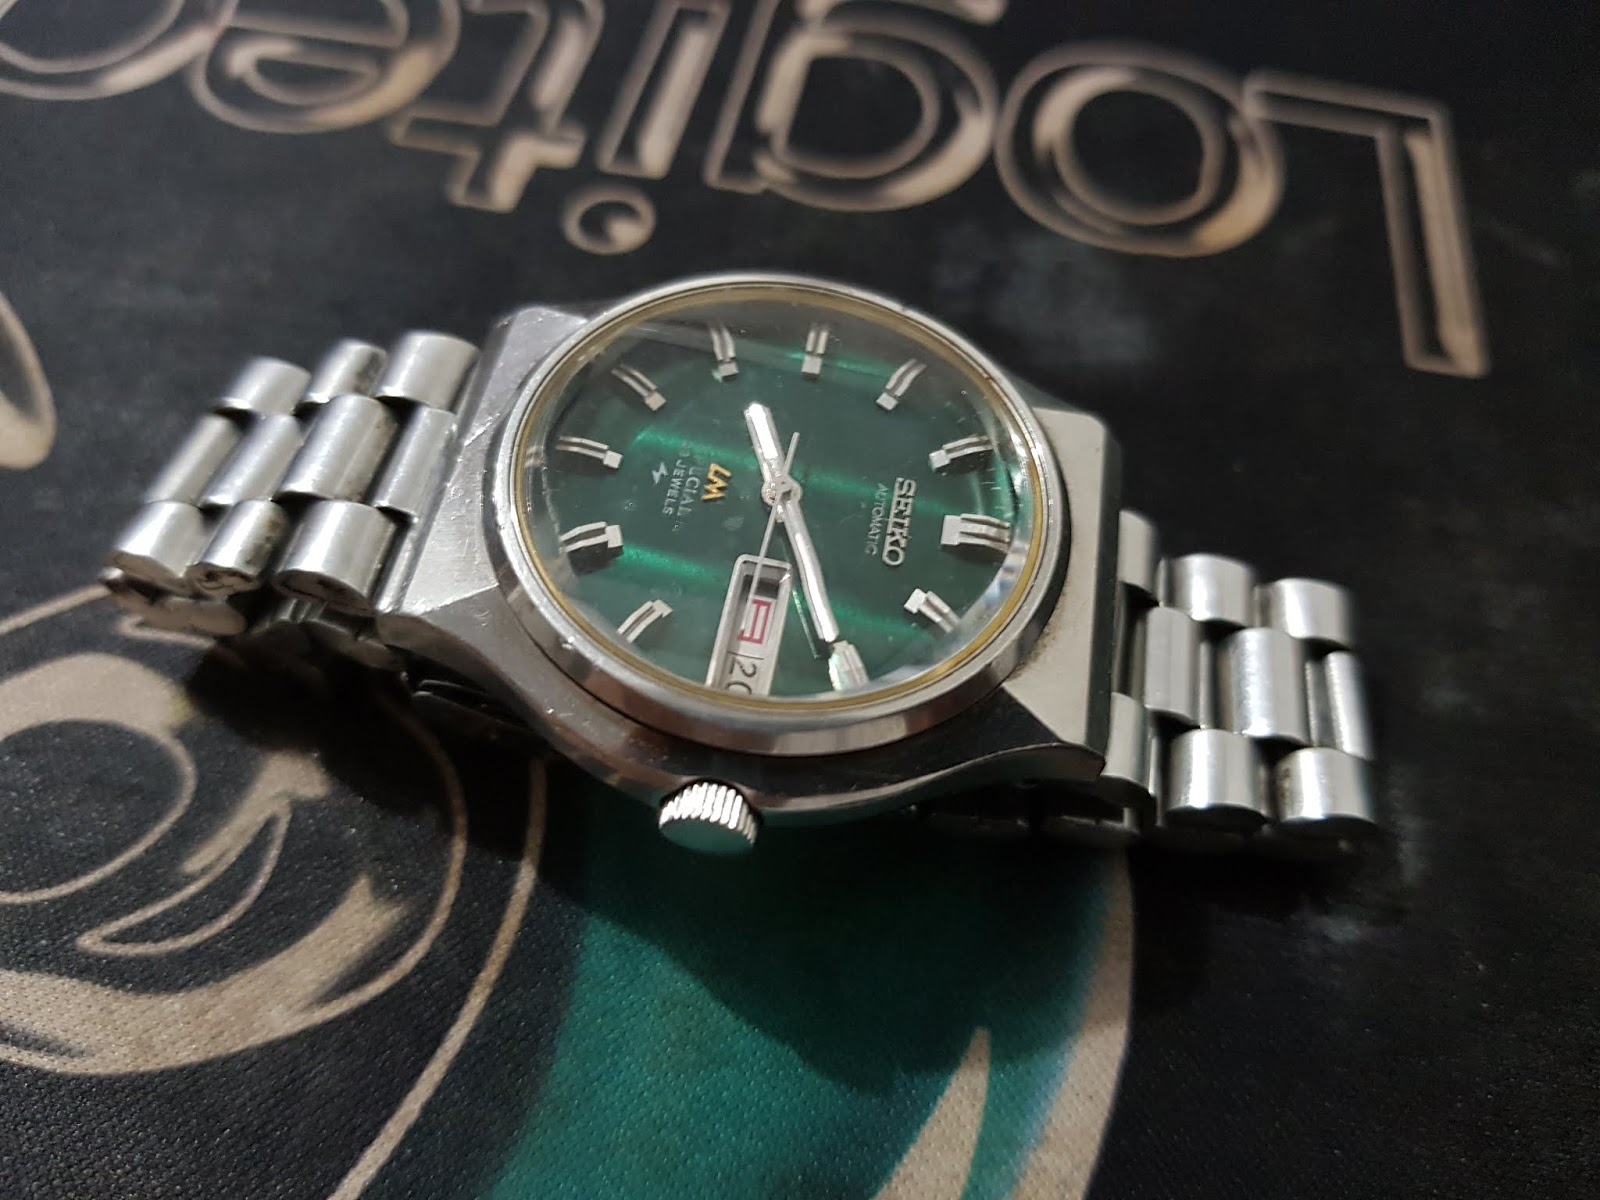 FS - Seiko LM Special Ref. 5216-7040 green dial - us $100 | The Watch Site